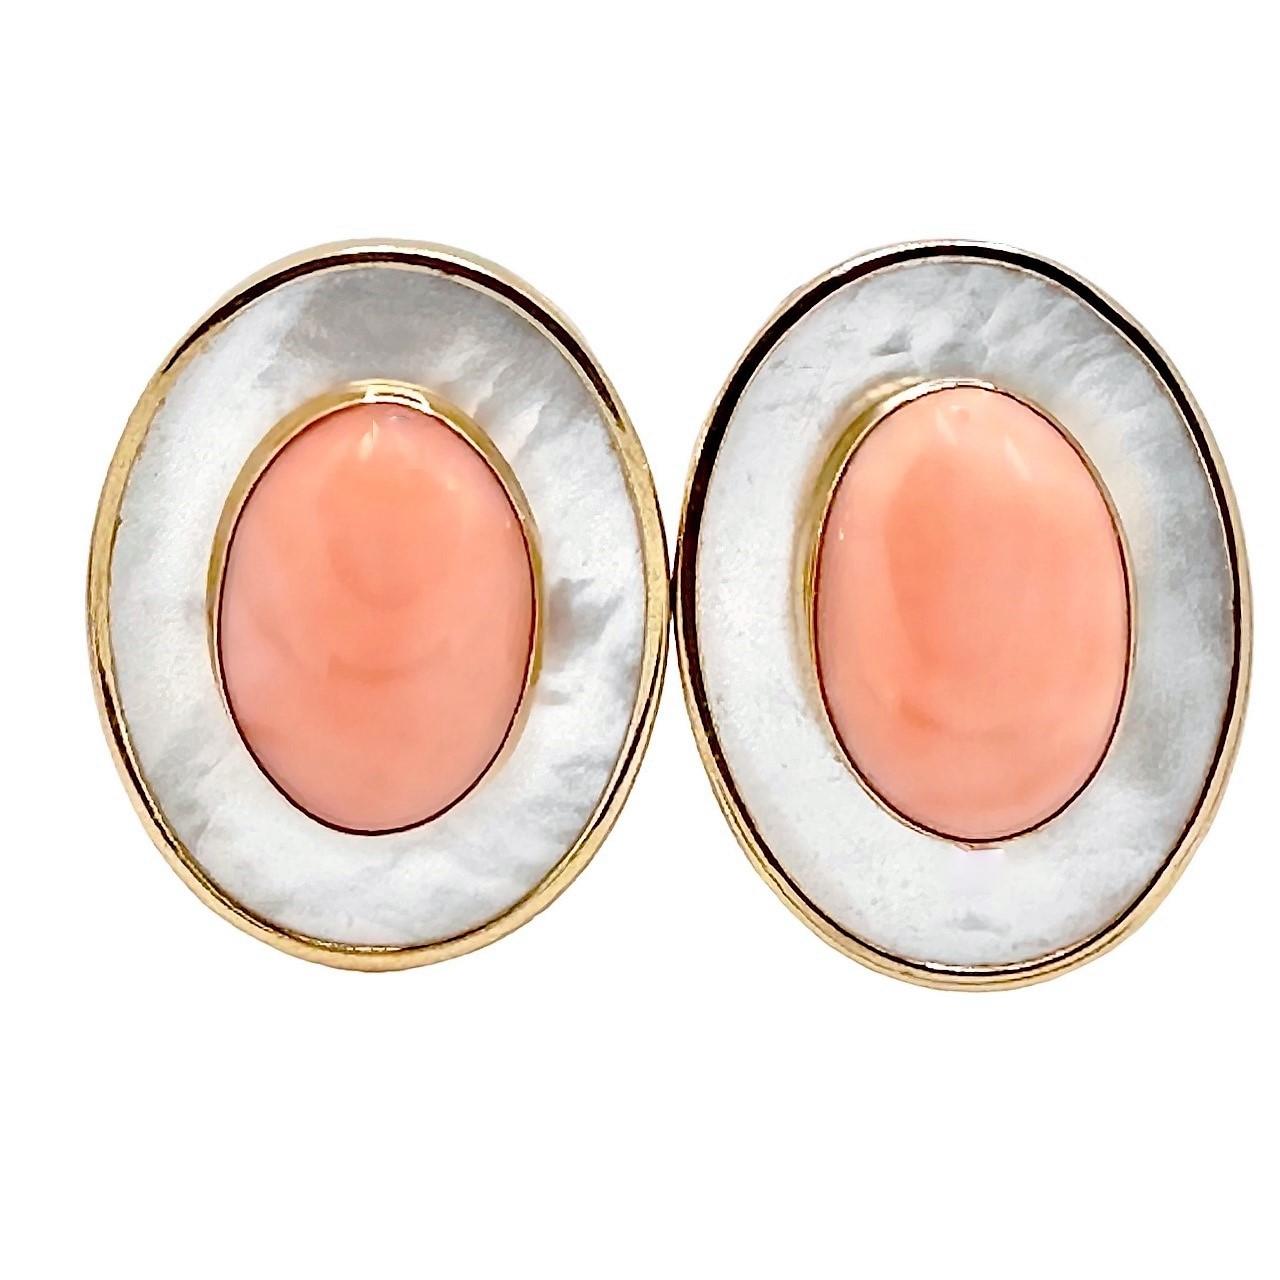 This pair of very aesthetic and soundly constructed 14K yellow gold clip on earrings are truly captivating, with two richly colored angel skin coral cabochons set in bezels on a background of vibrant mother of pearl. They are lightweight and